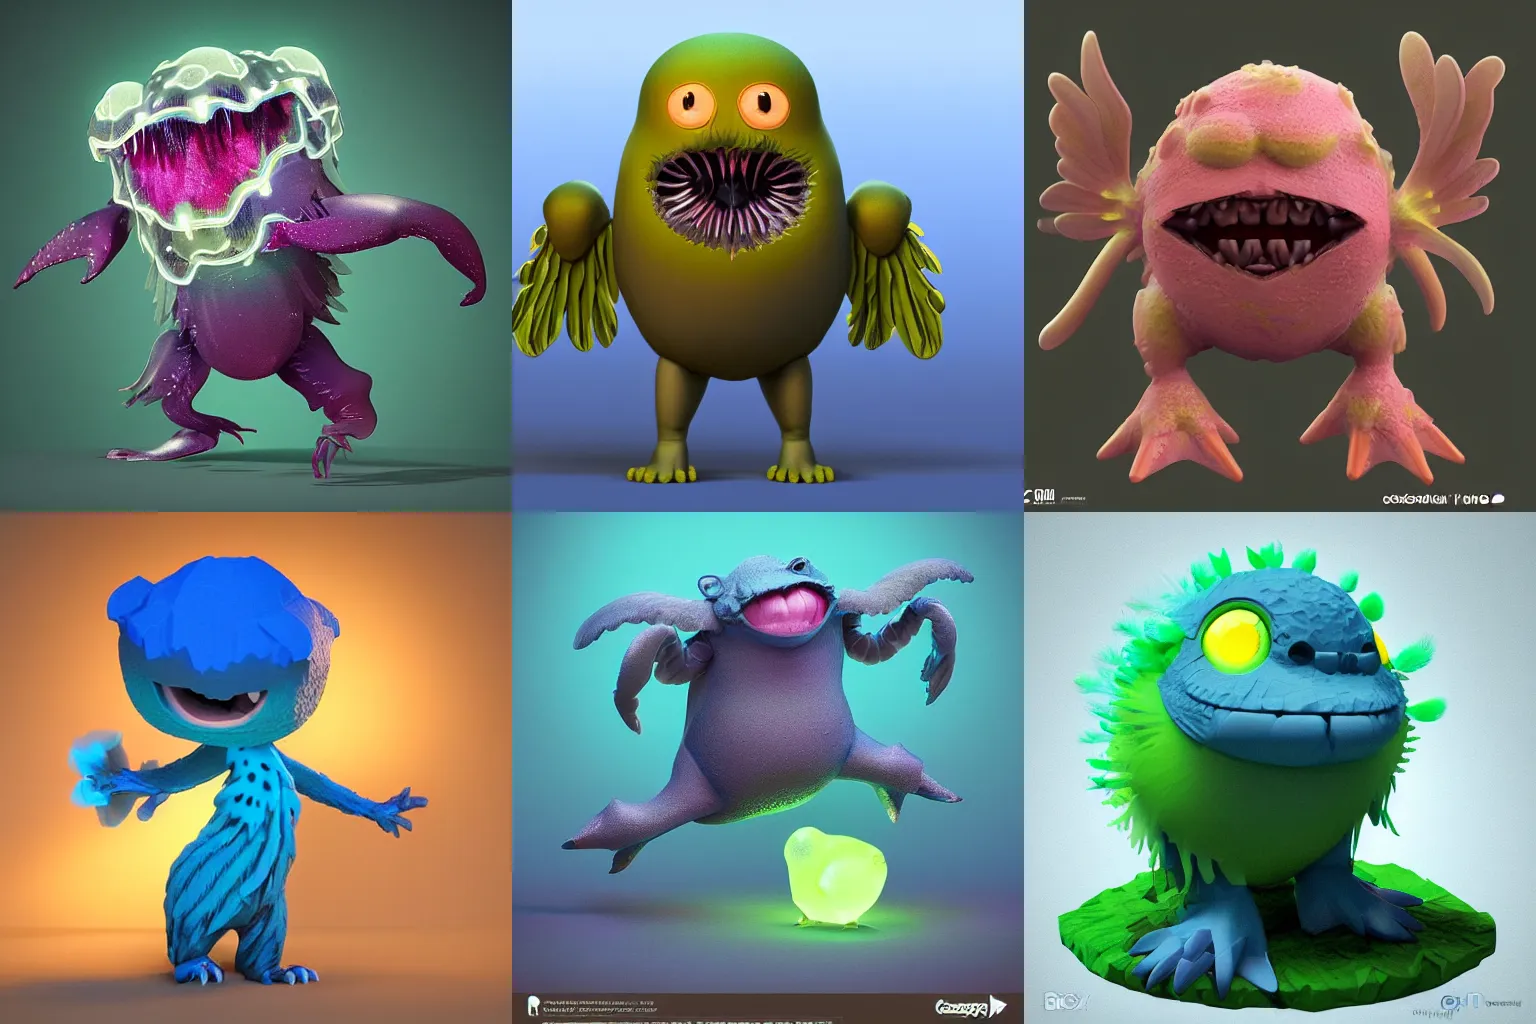 Prompt: cute! c4d, unreal engine, pixar, voxelart, rimlight, jelly fish dancing, fighting, bioluminescent screaming feathers pictoplasma characterdesign toydesign toy monster bird of paradise creature, zbrush, octane, hardsurface modelling, artstation, cg society, by greg rutkowksi, by Eddie Mendoza, by Peter mohrbacher, by tooth wu